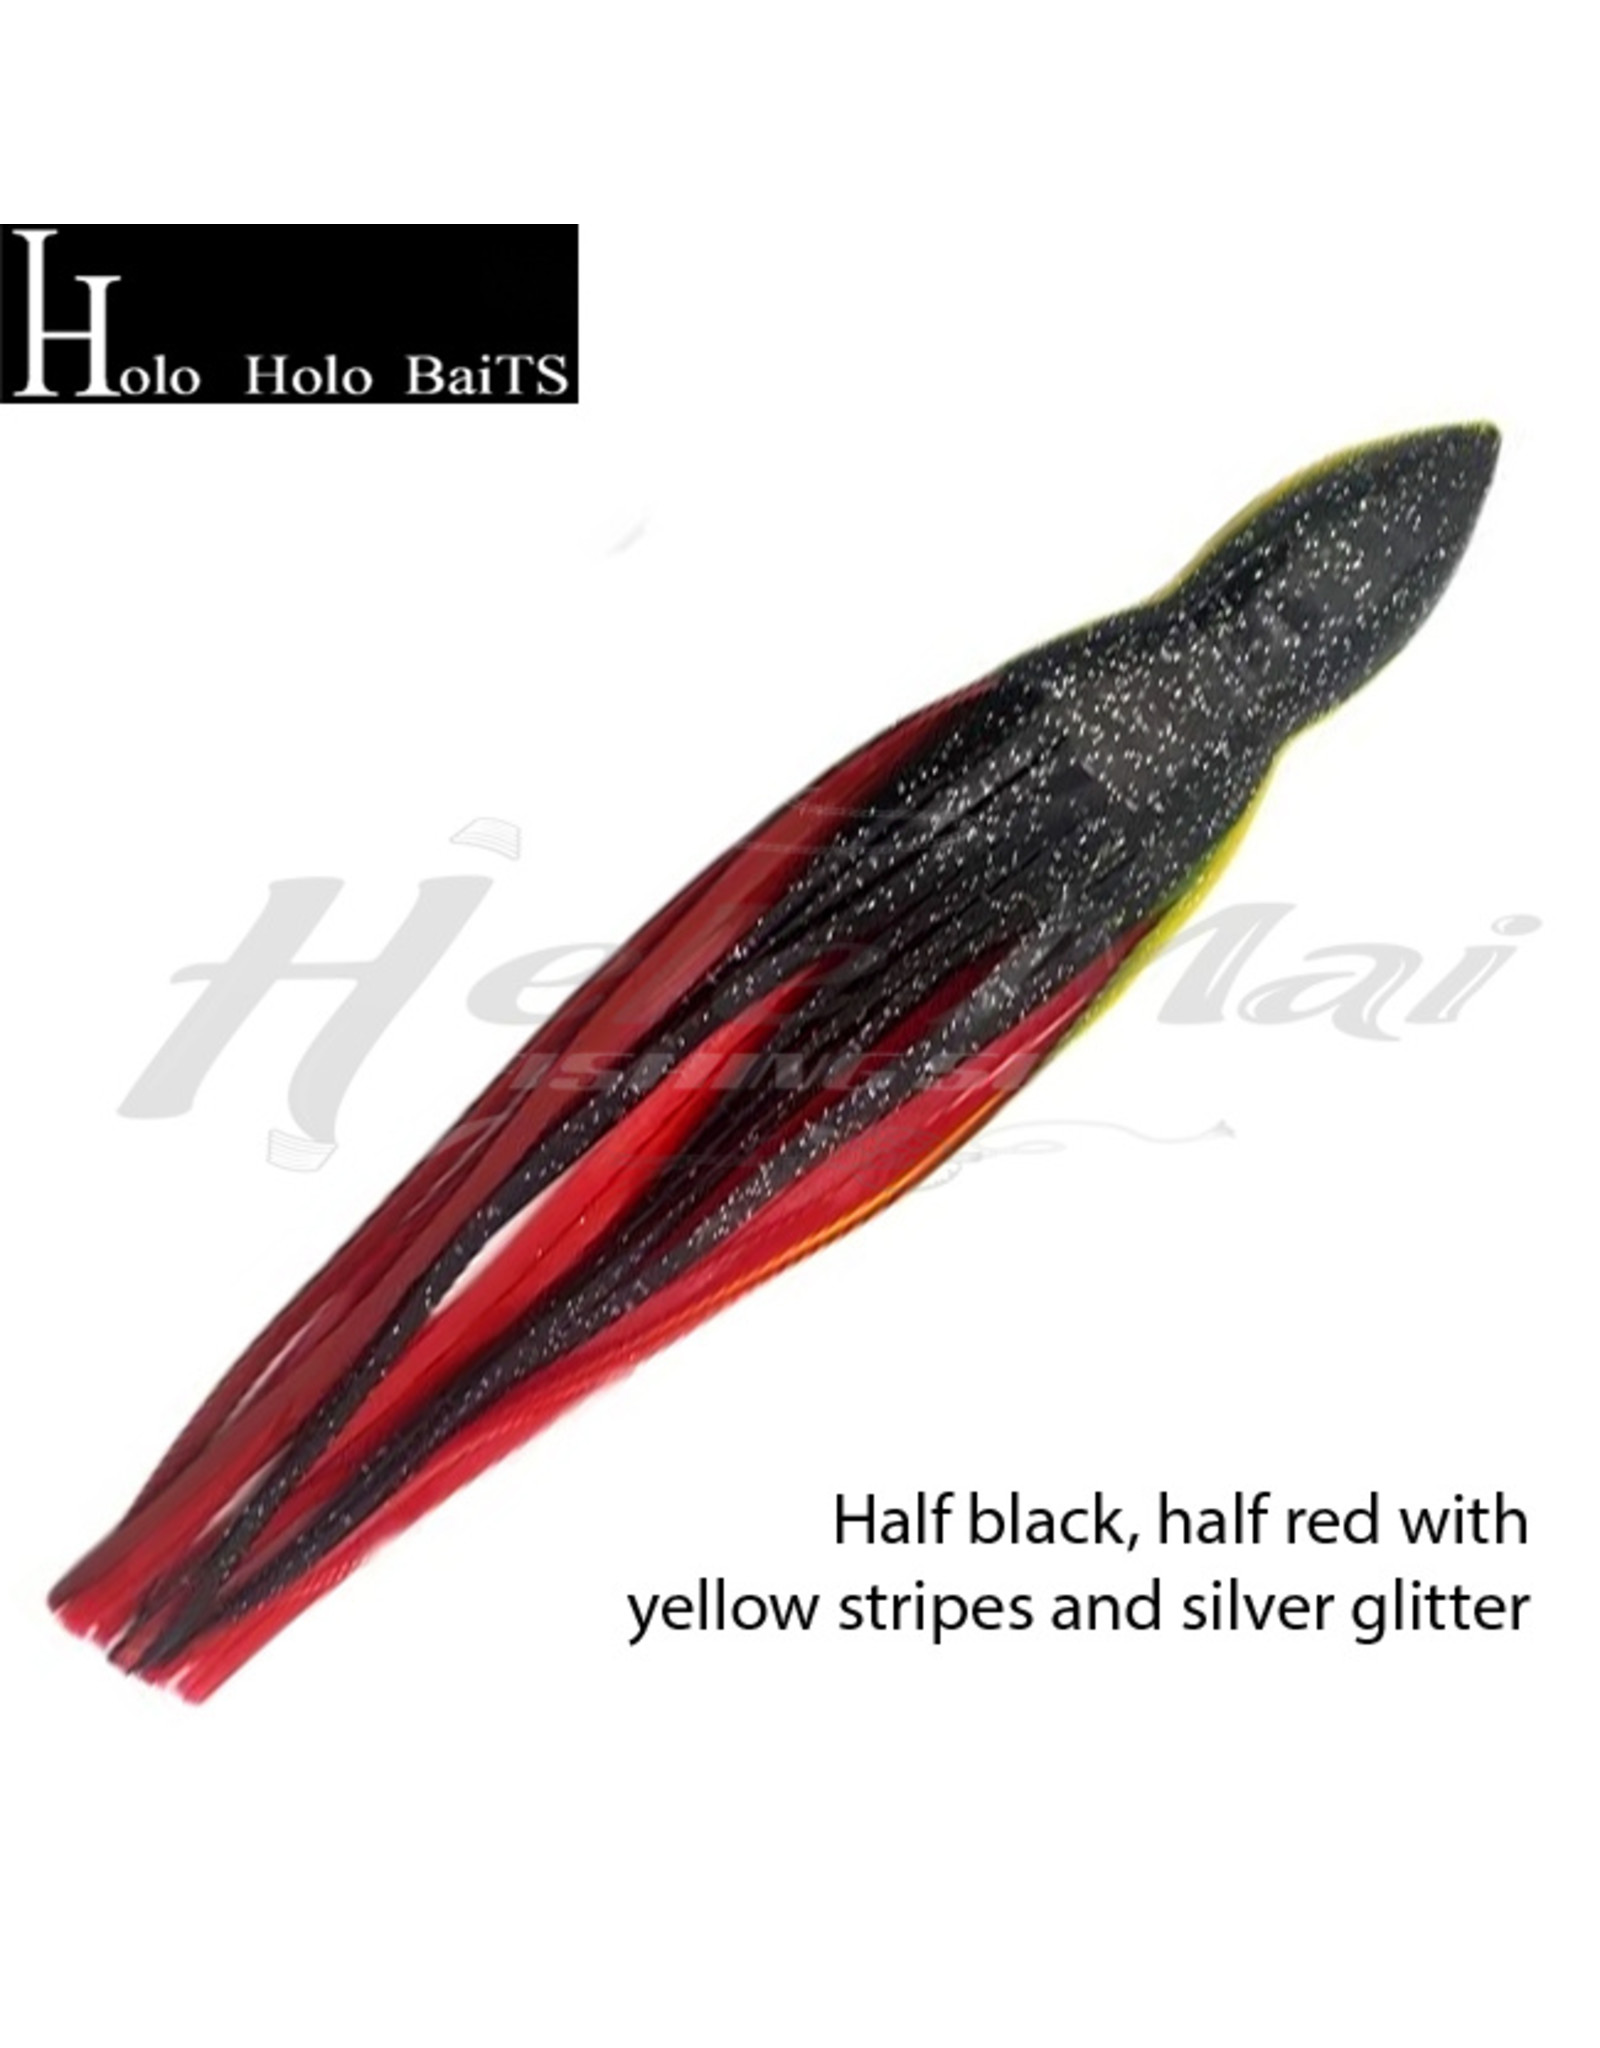 HOLO HOLO HAWAII (HHH) HH, 9" SQUID SKIRT BLACK RED GLITTER 0654